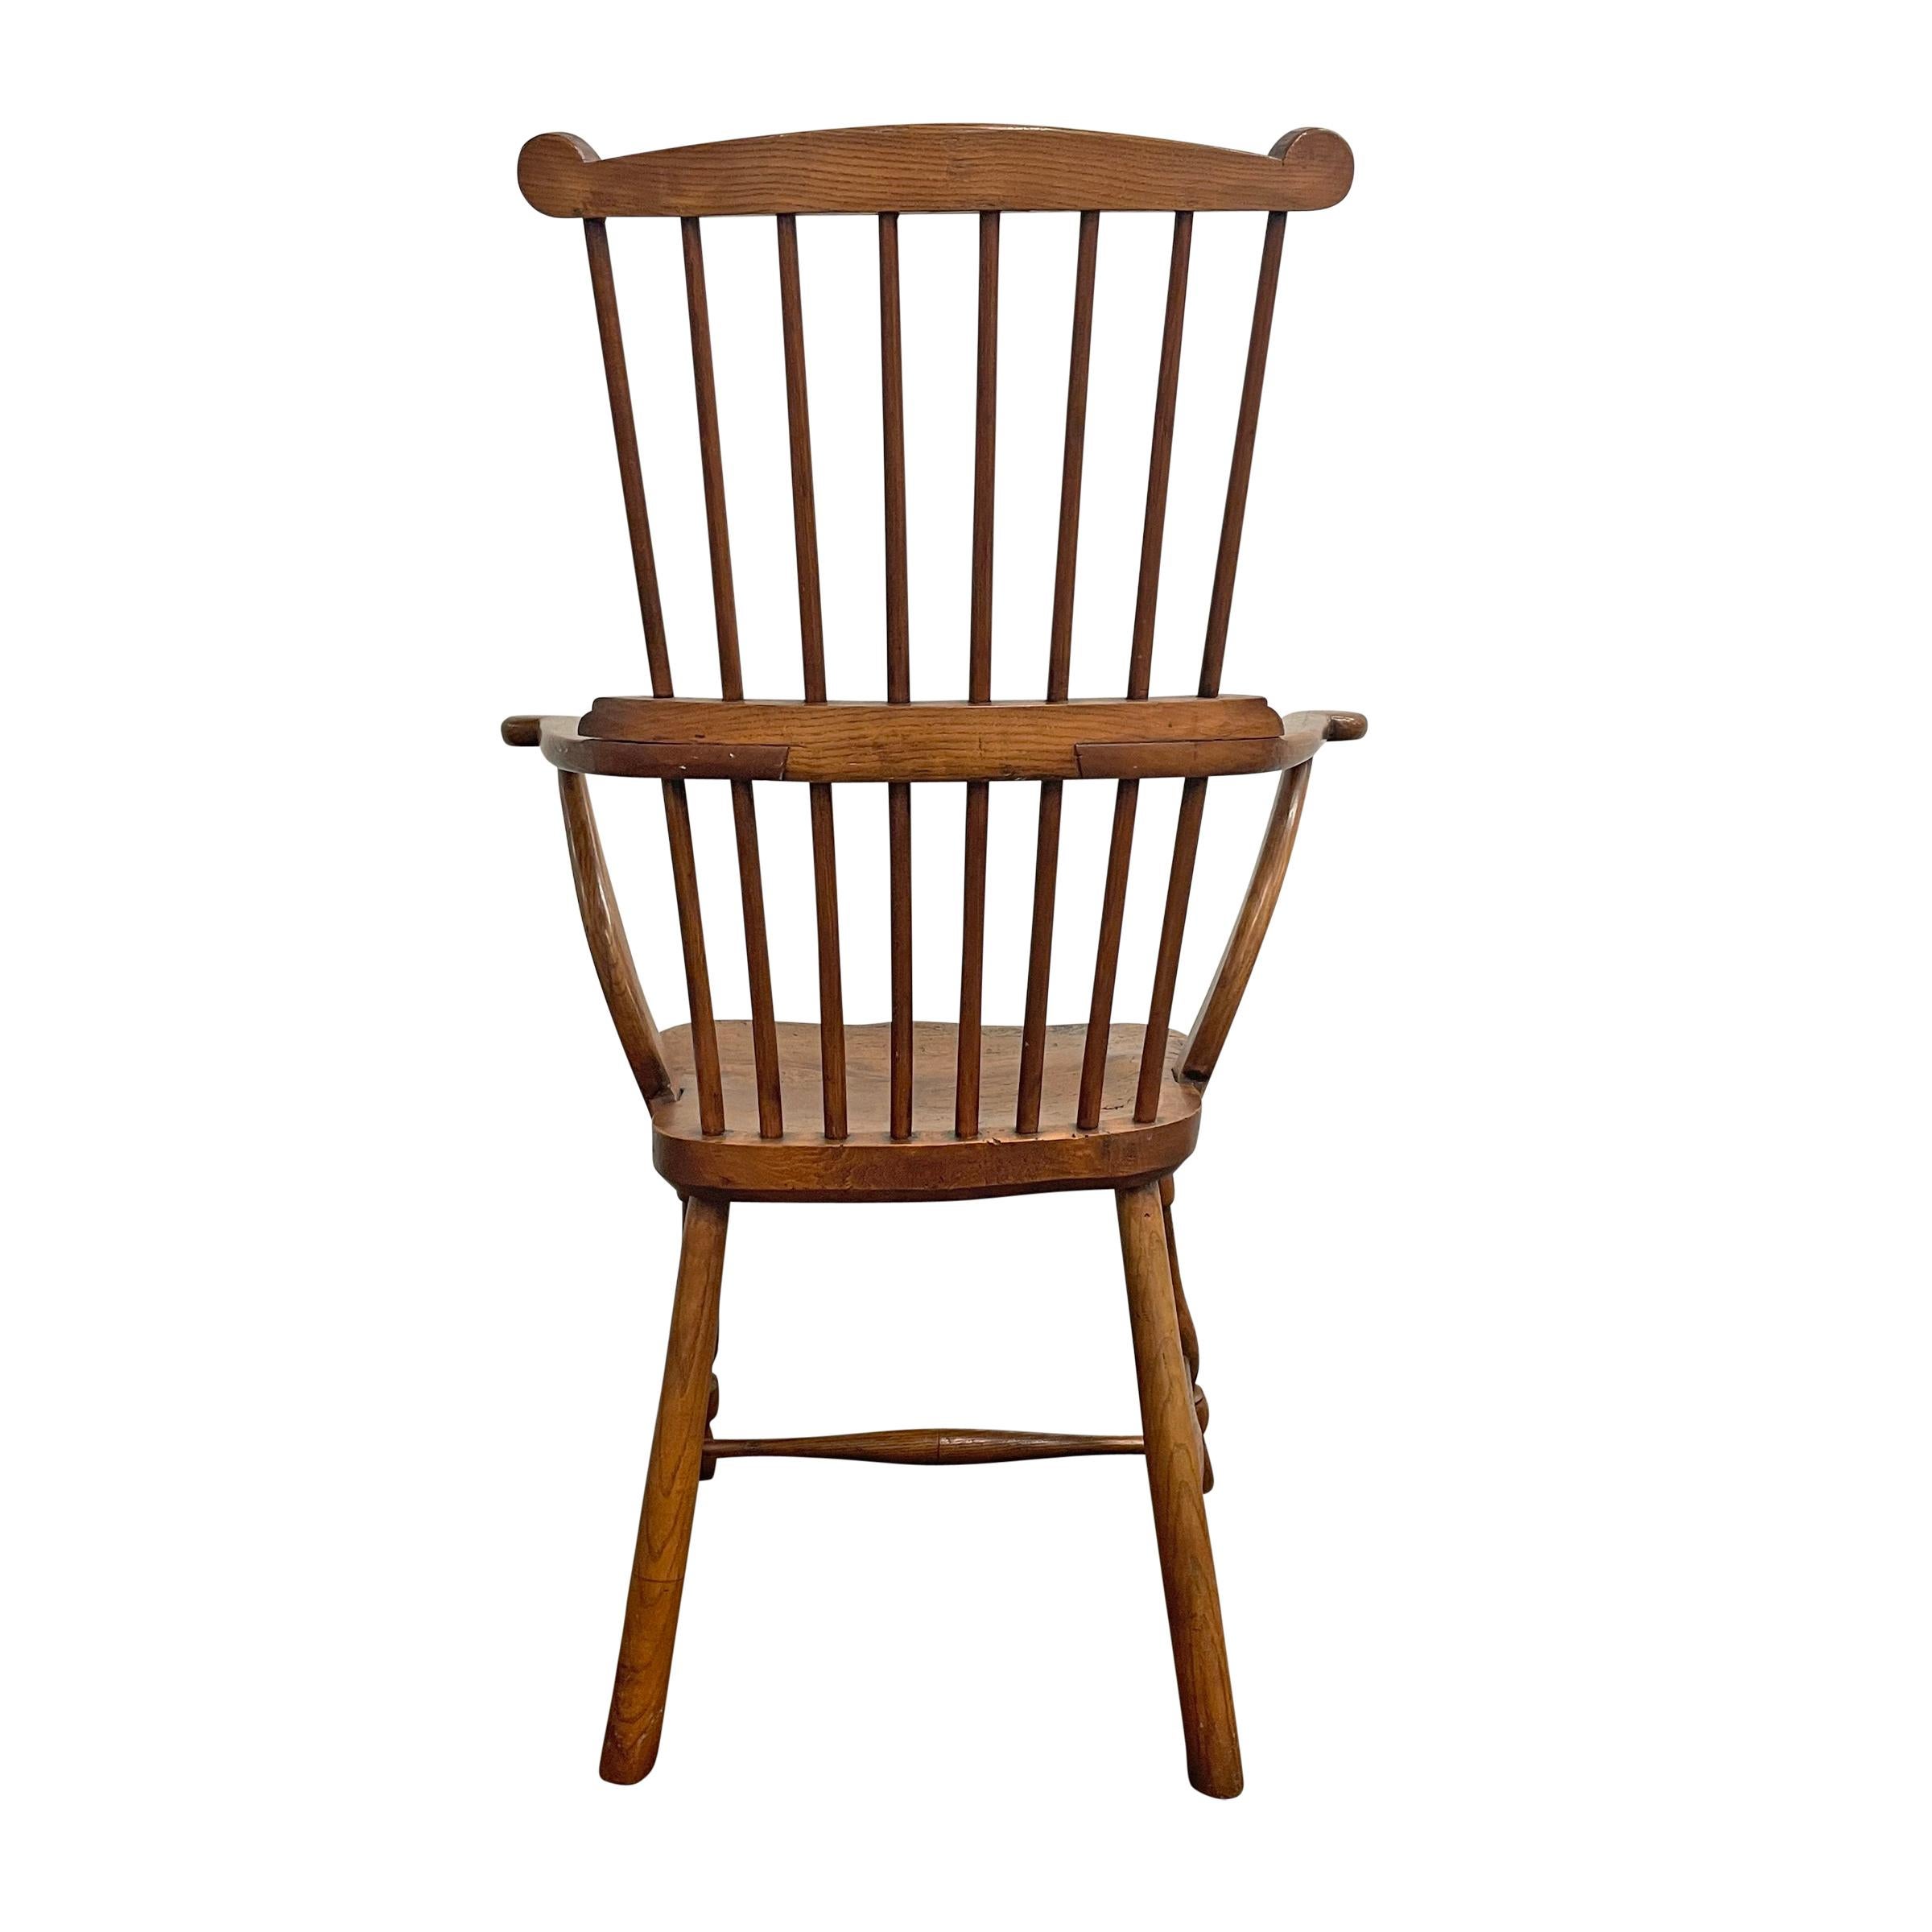 Ash 19th Century English Comb-Back Windsor Chair